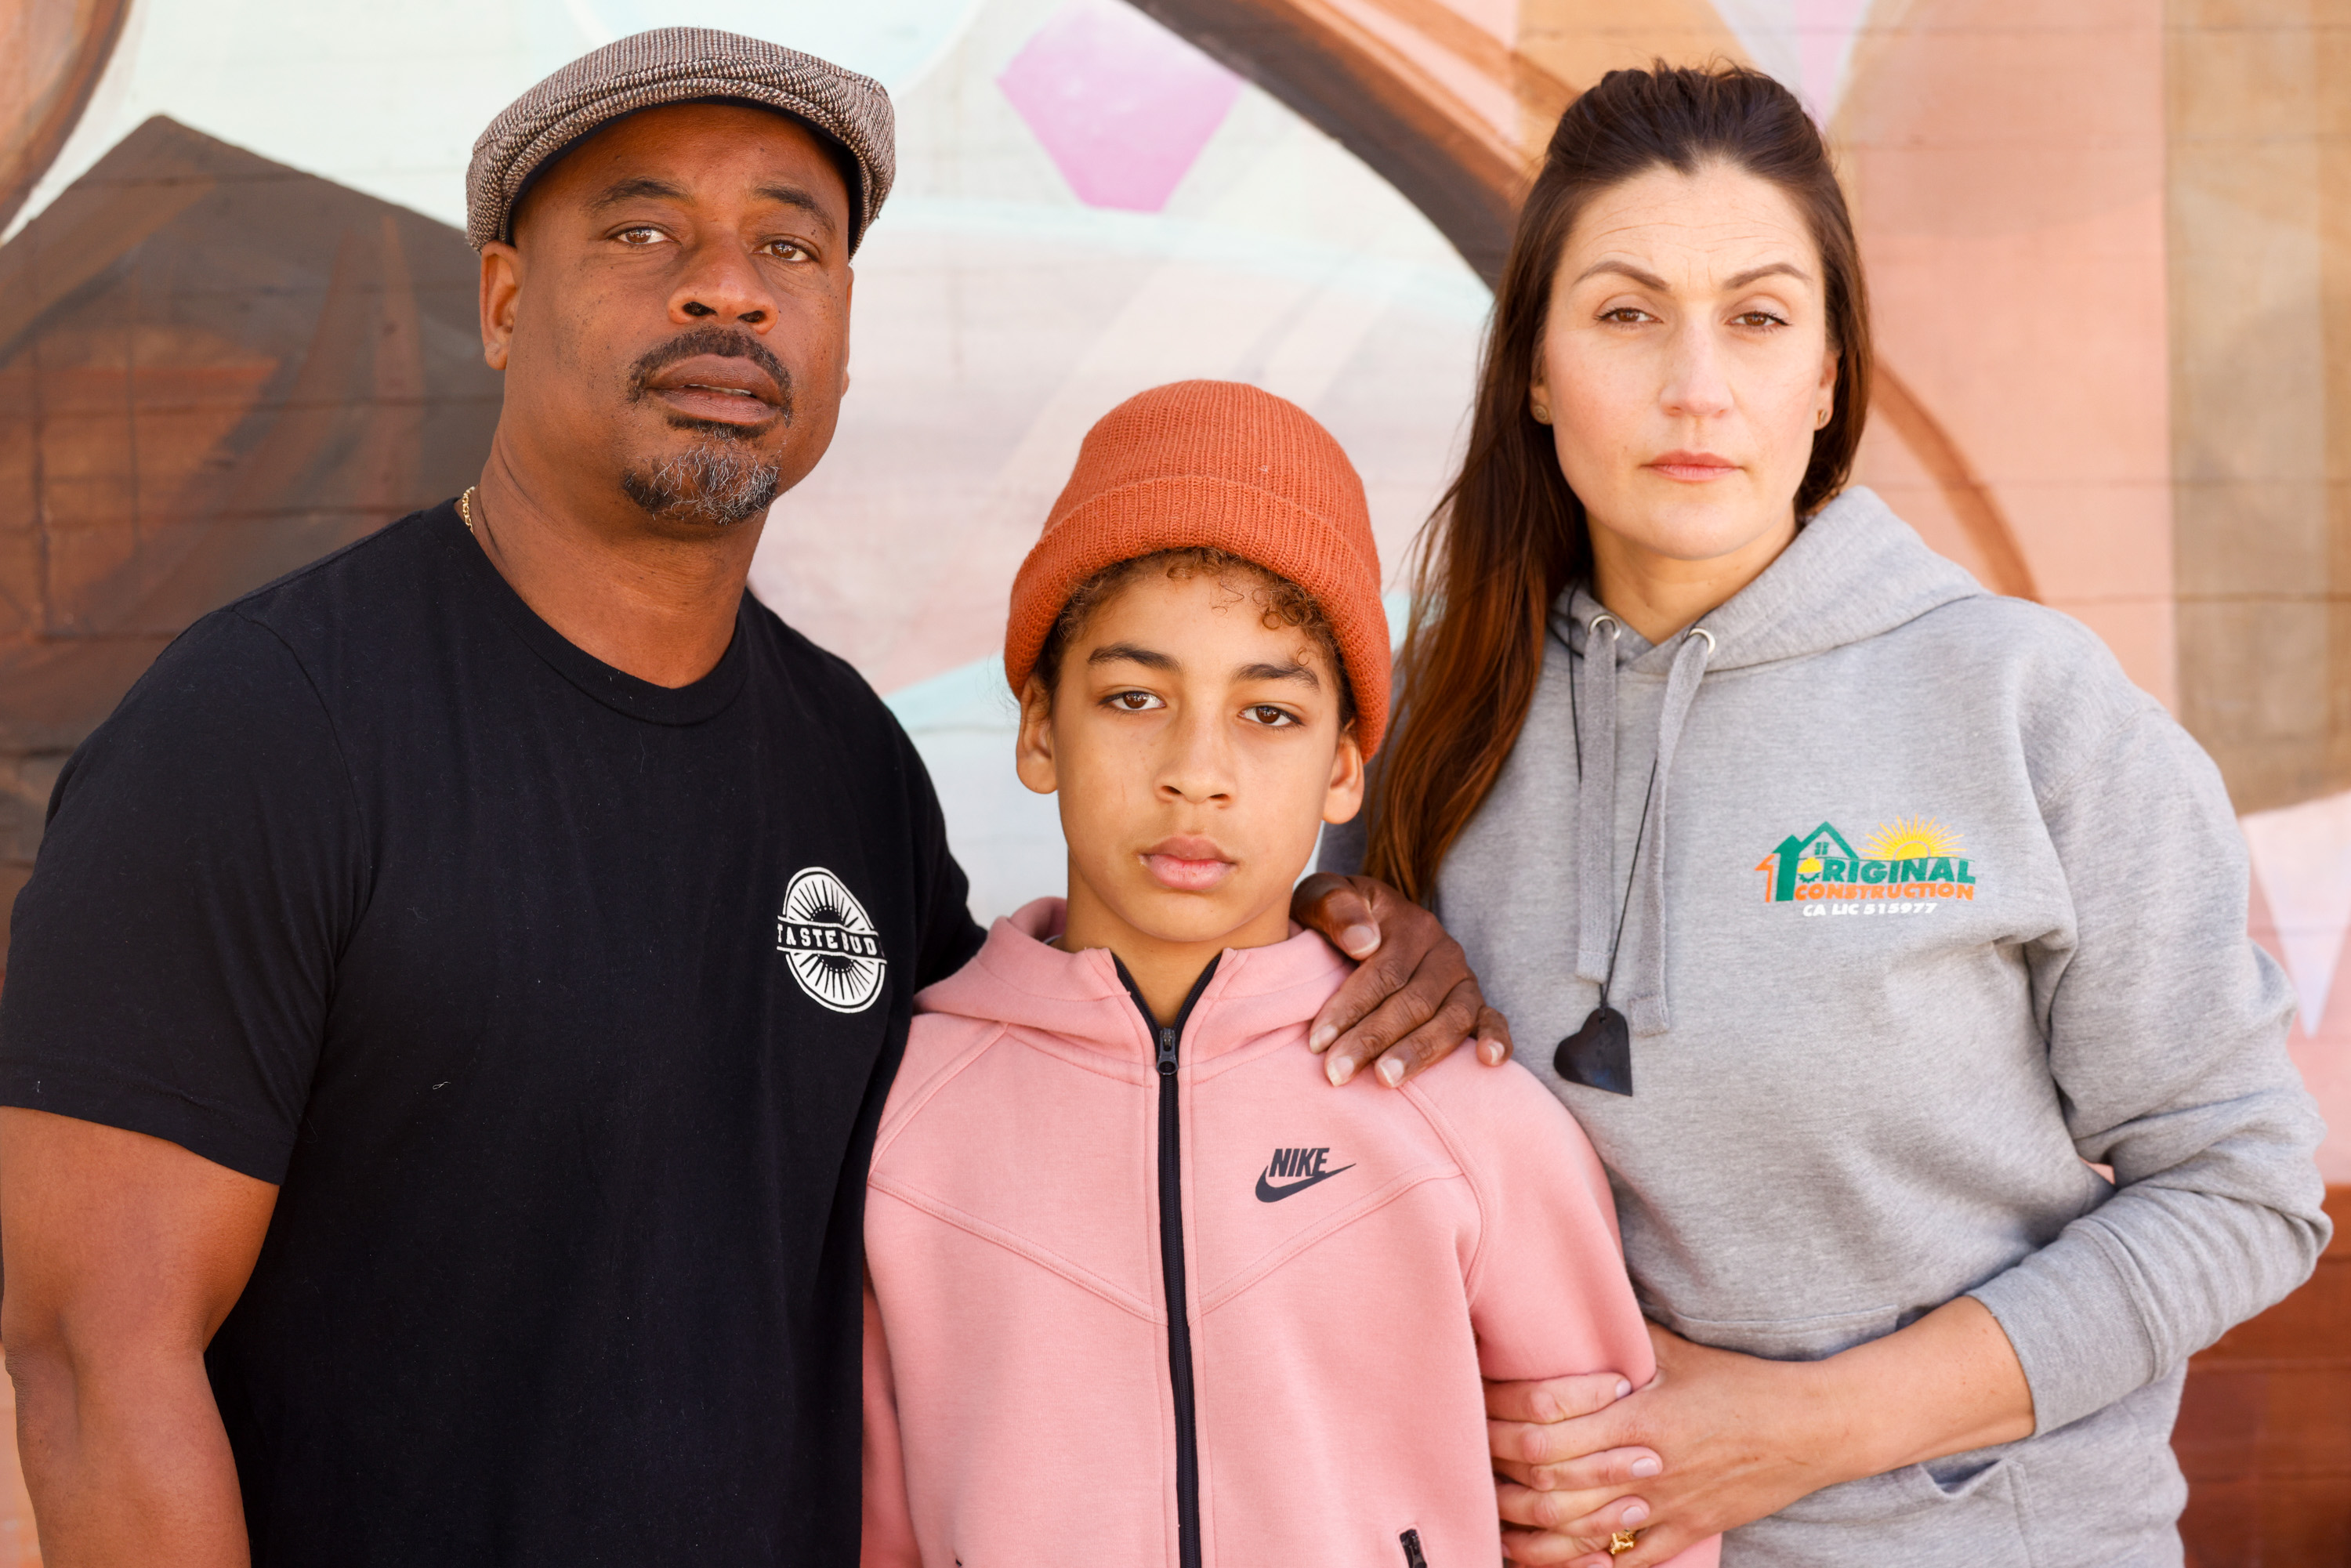 A family of three, with the parents flanking a teenager, stands together in front of a mural.